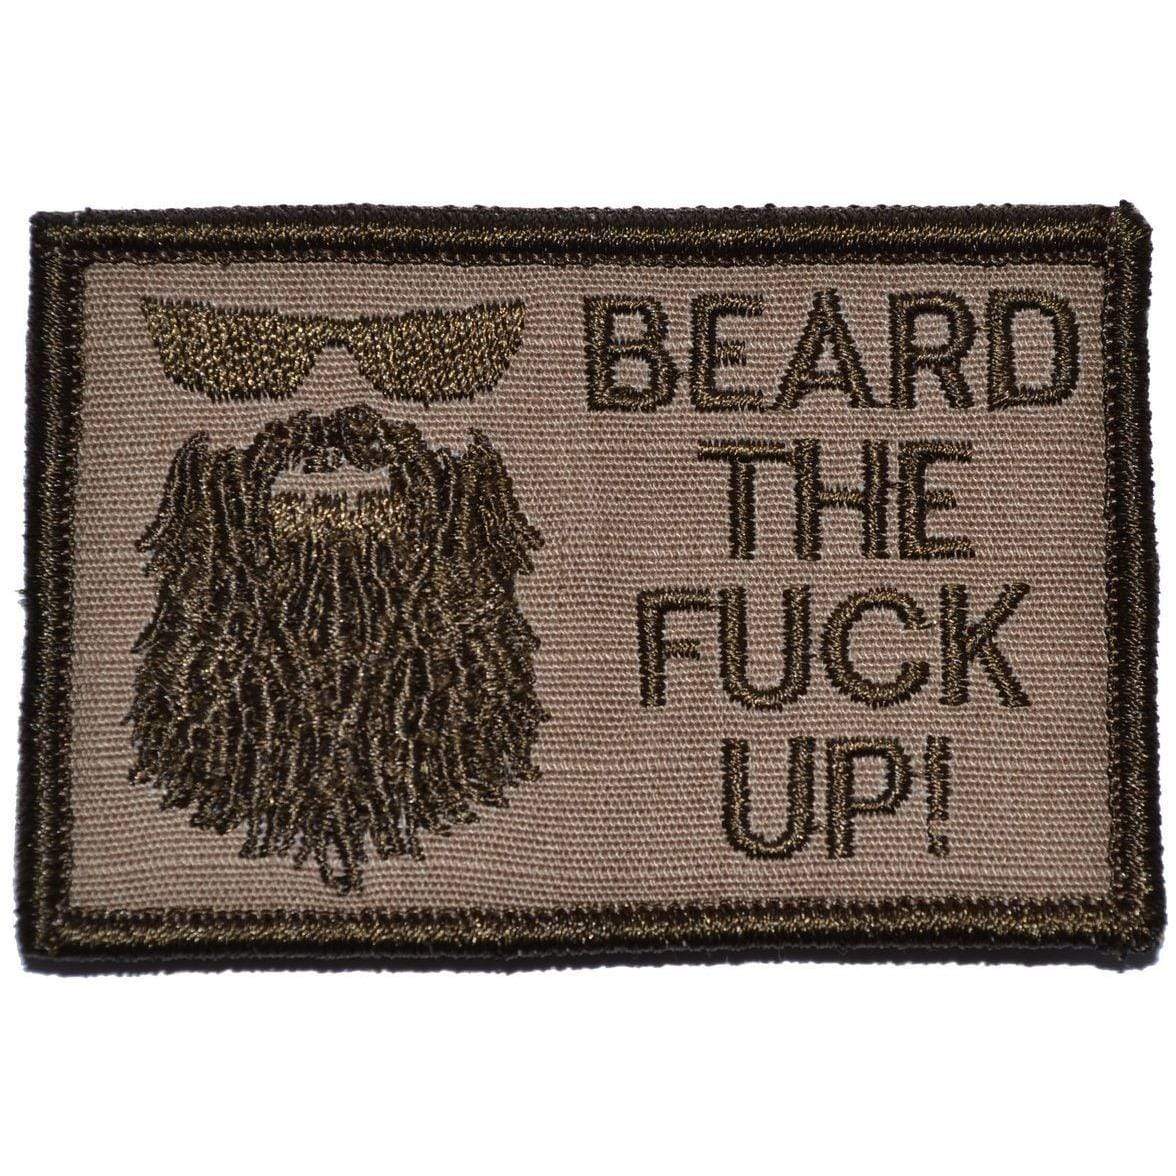 Tactical Gear Junkie Patches Coyote Brown Beard the Fuck Up - 2x3 Patch